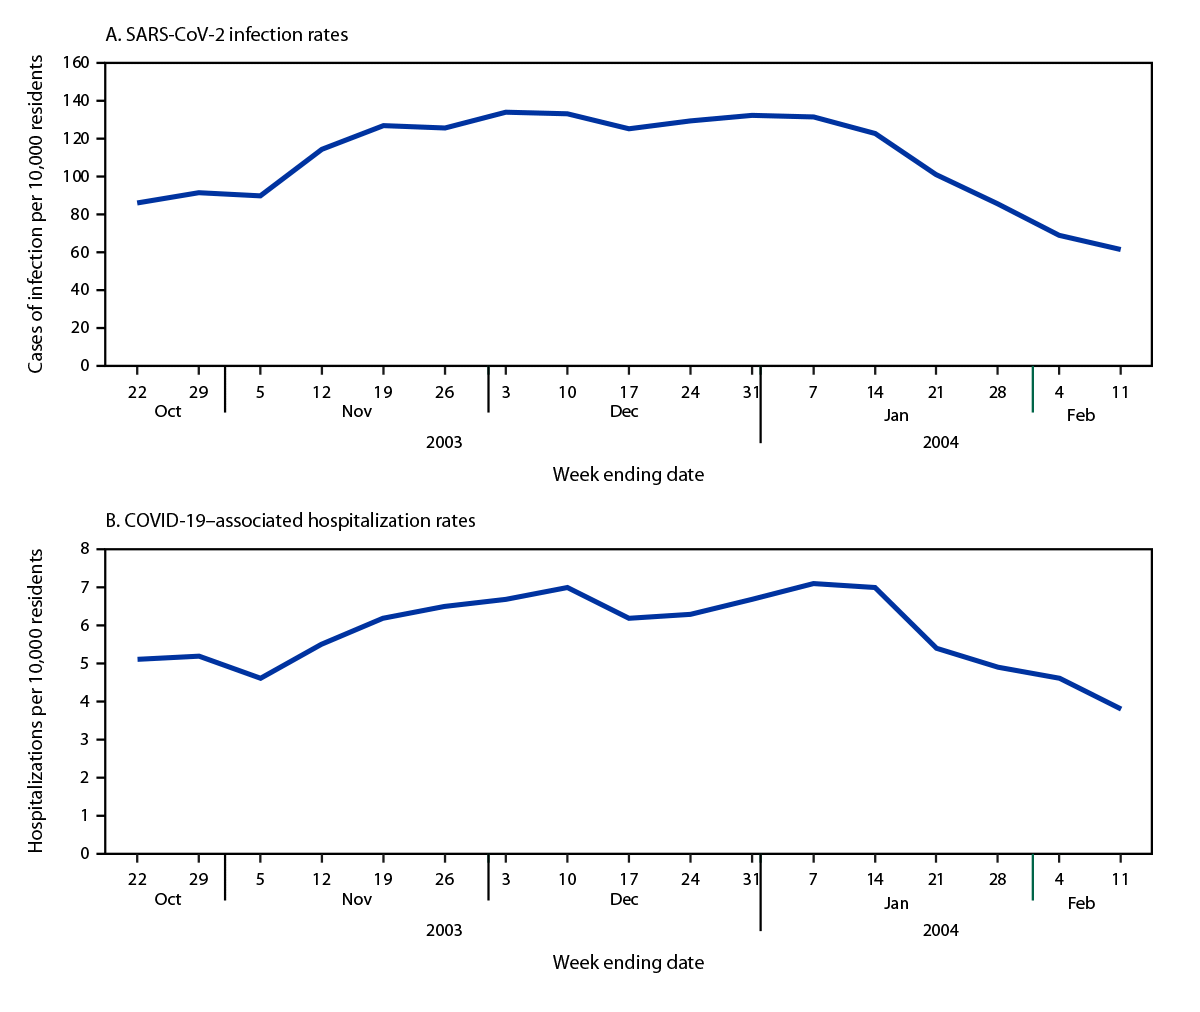 The figure is a line graph consisting of two panels depicting weekly rates of SARS-CoV-2 infection and COVID-19-associated hospitalization among nursing home residents in the United States during October 16, 2023–February 11, 2024, according to data from the National Healthcare Safety Network.